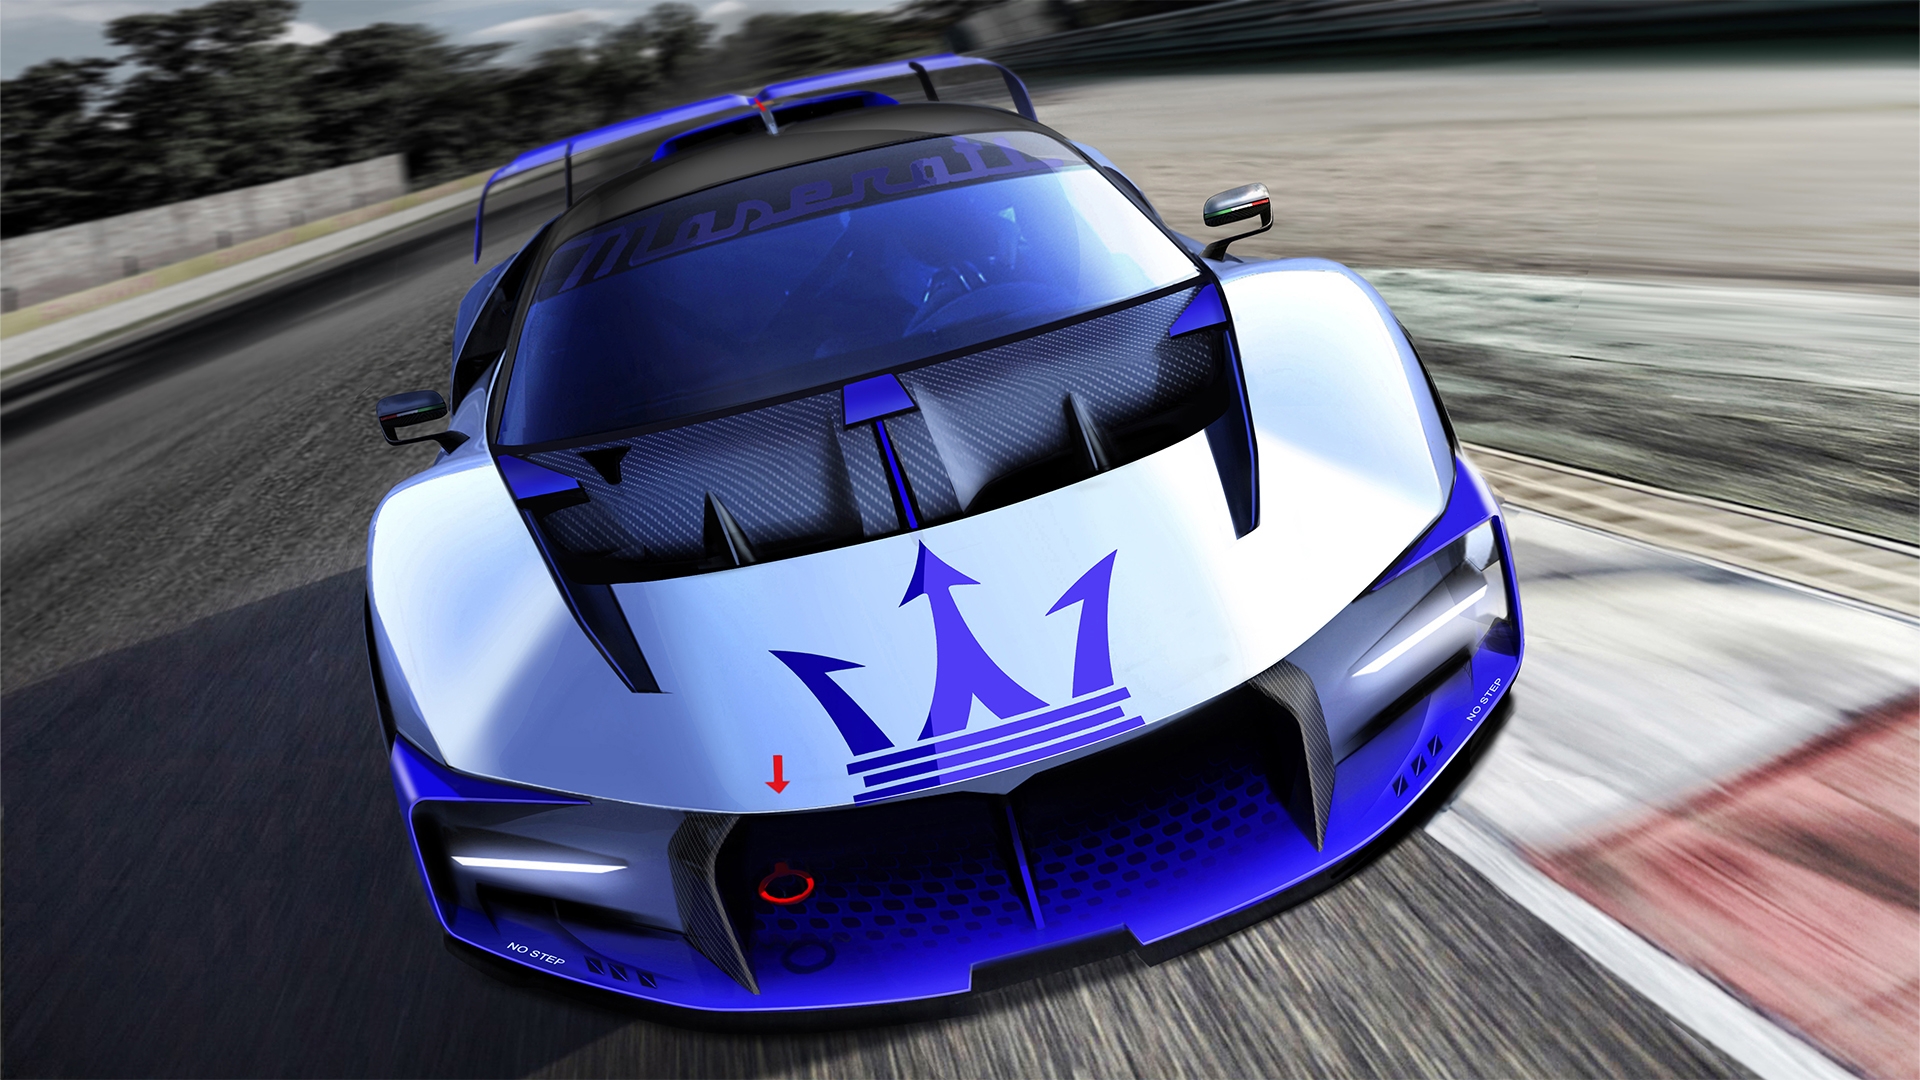 Beauty is a beast: Maserati previews track-focused Project24